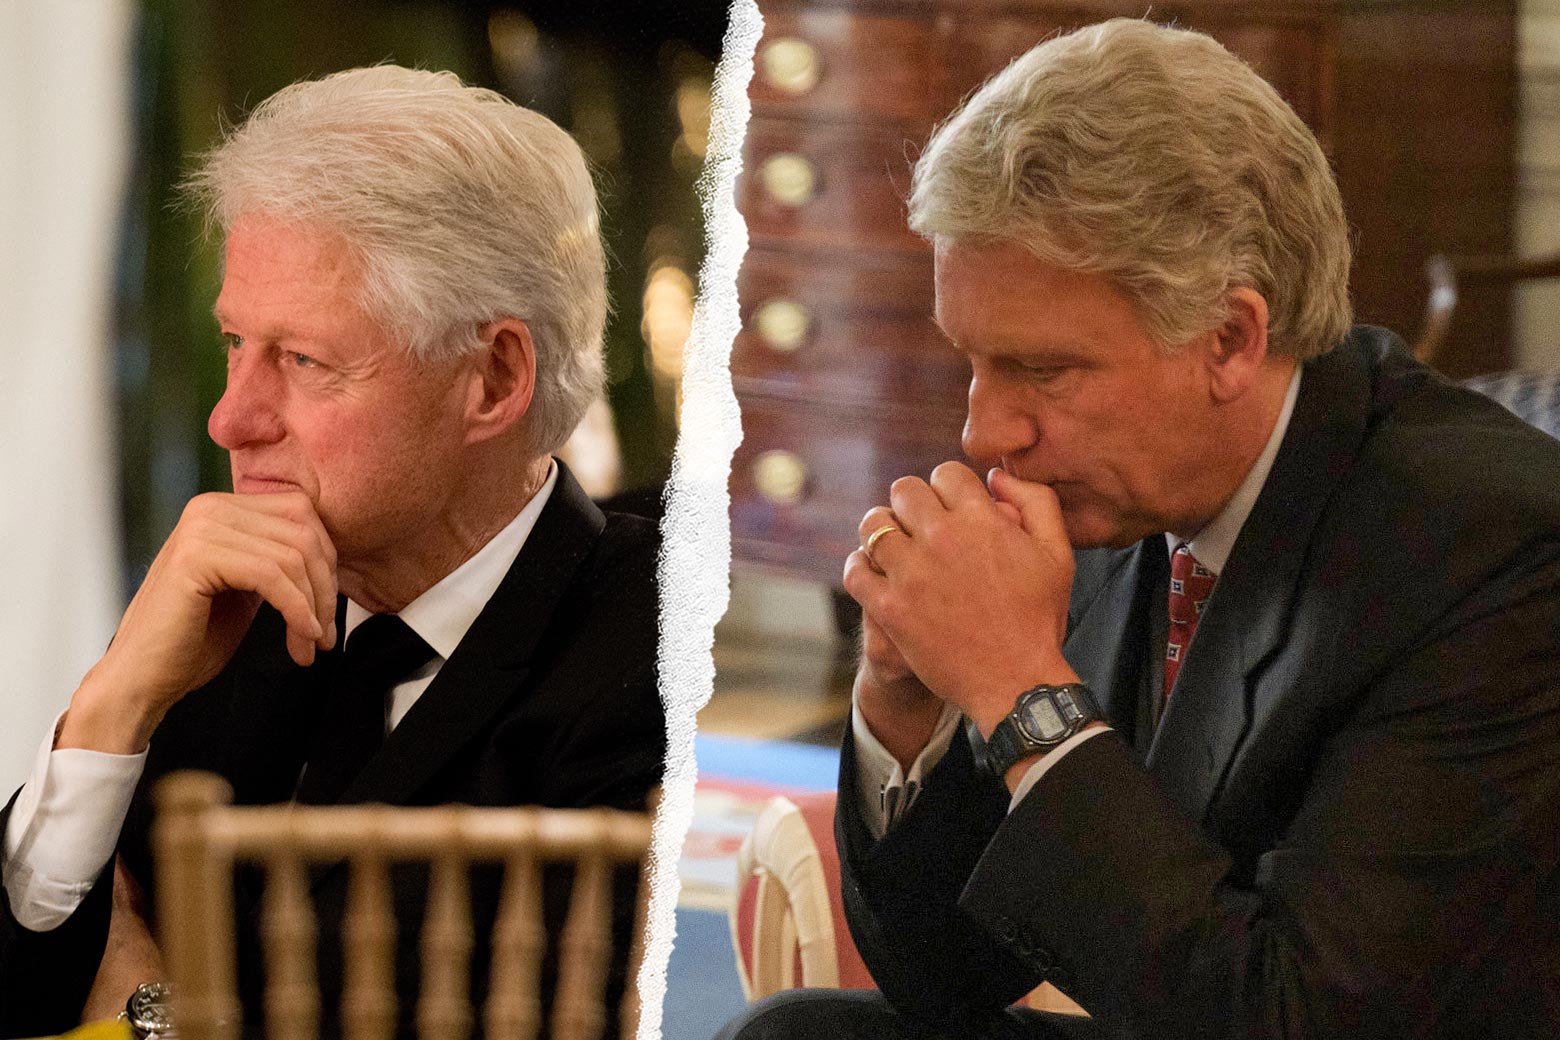 Clinton holds his chin in his hand at an event. Clive Owen, as Clinton, rests his head on his hands. 